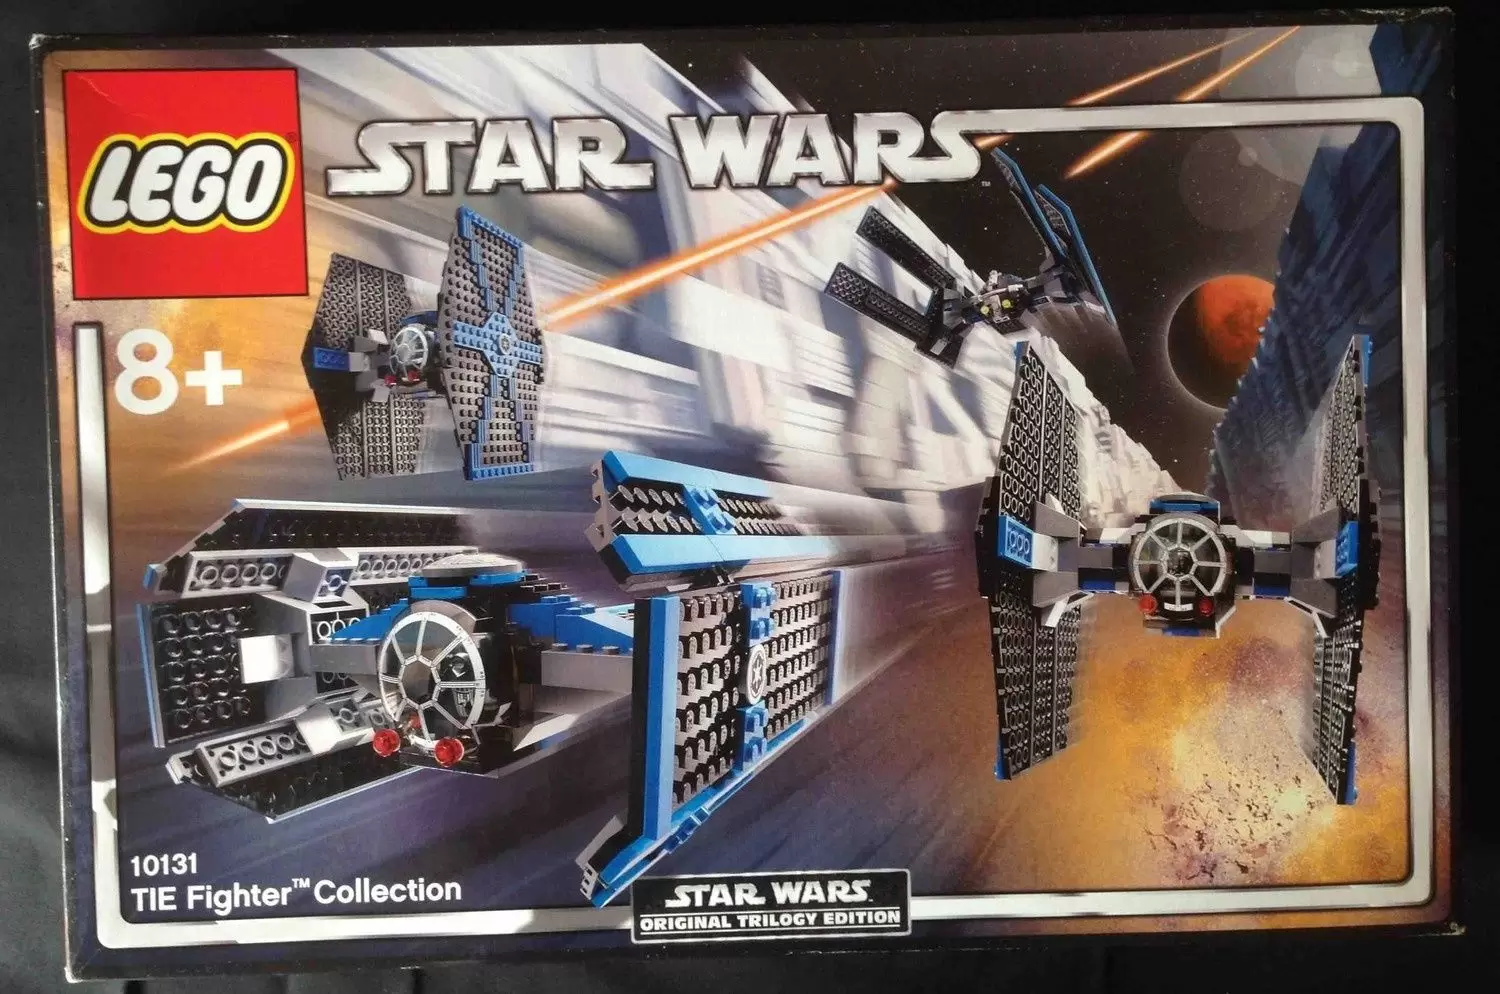 LEGO Star Wars - TIE Fighter Collection